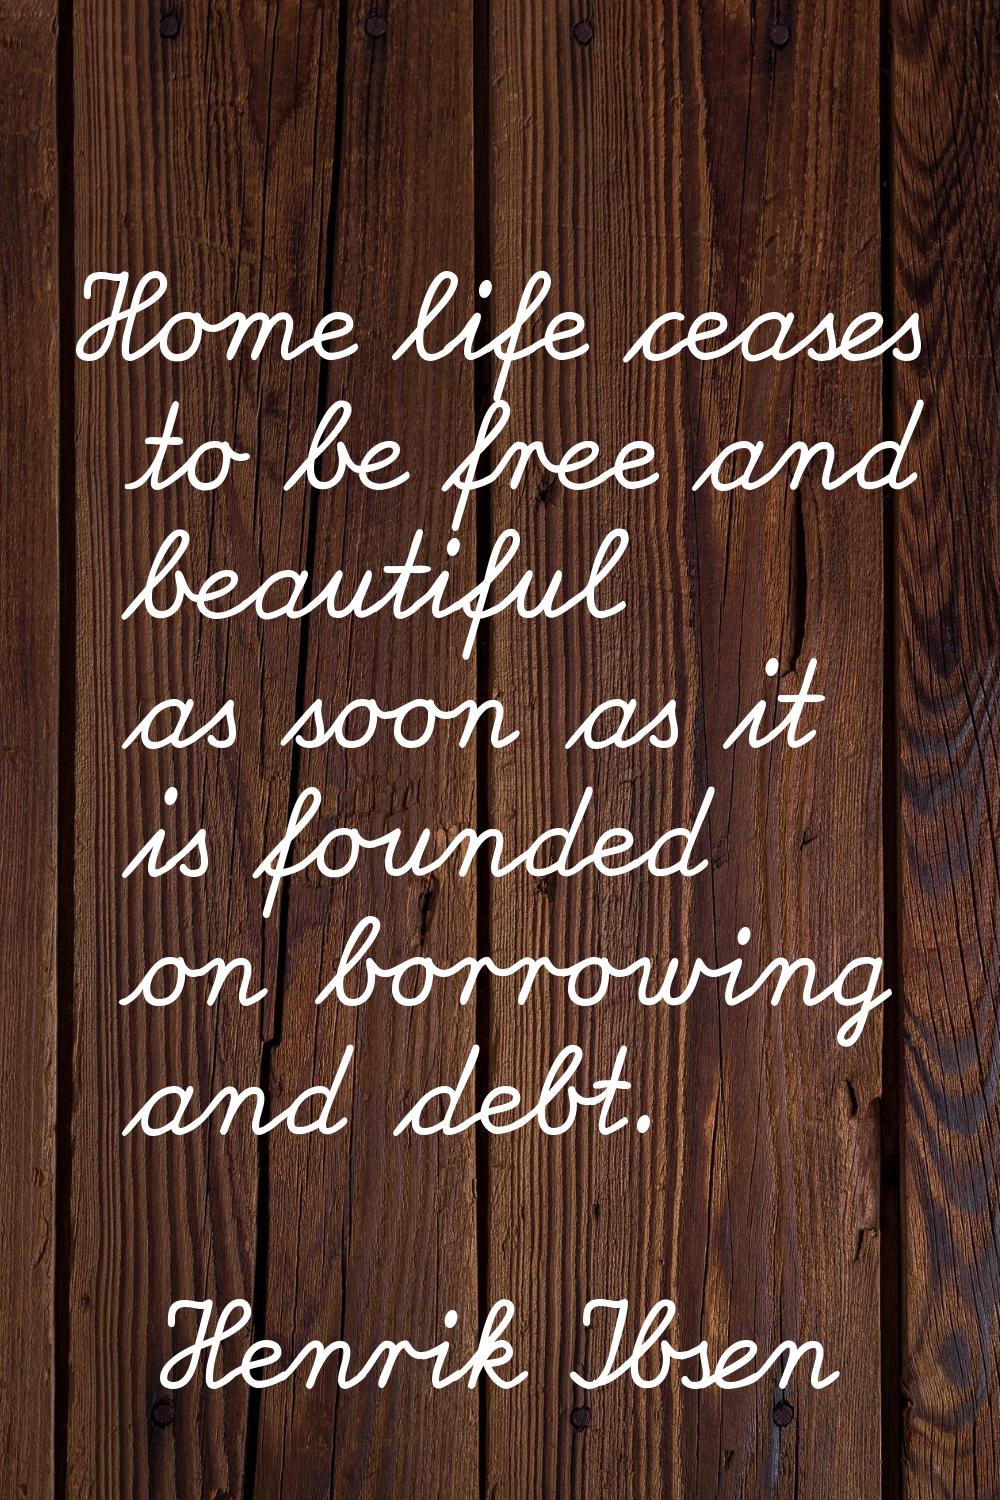 Home life ceases to be free and beautiful as soon as it is founded on borrowing and debt.